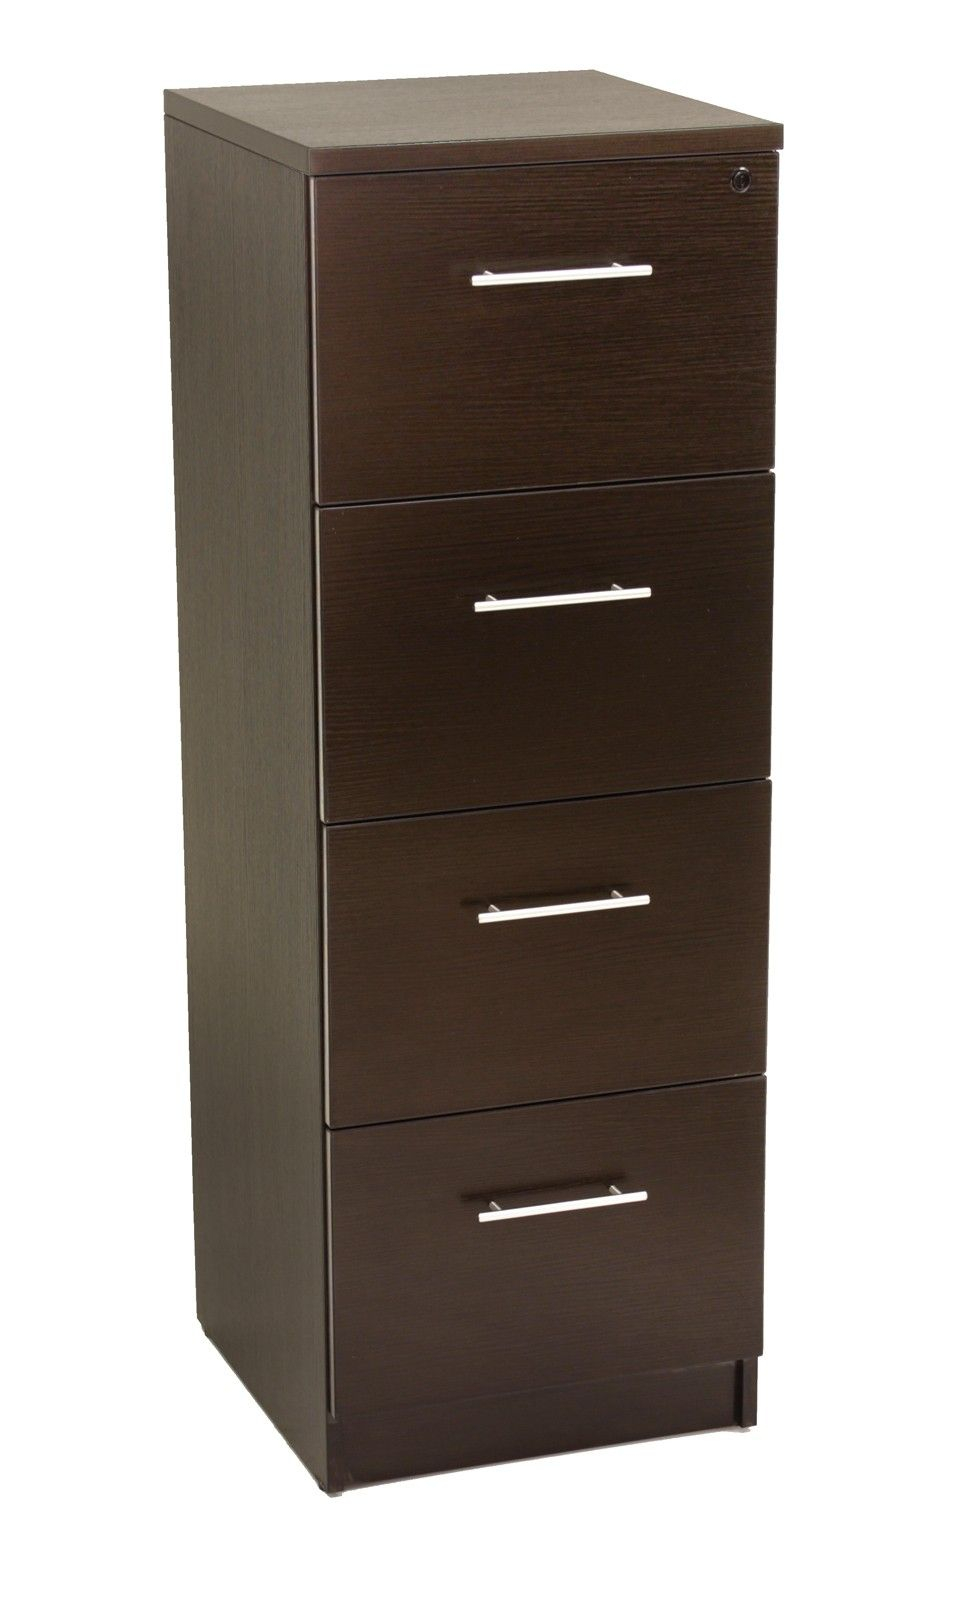 Unique 100 Collection 4 Drawer Vertical File Cabinet Espresso In intended for proportions 968 X 1600